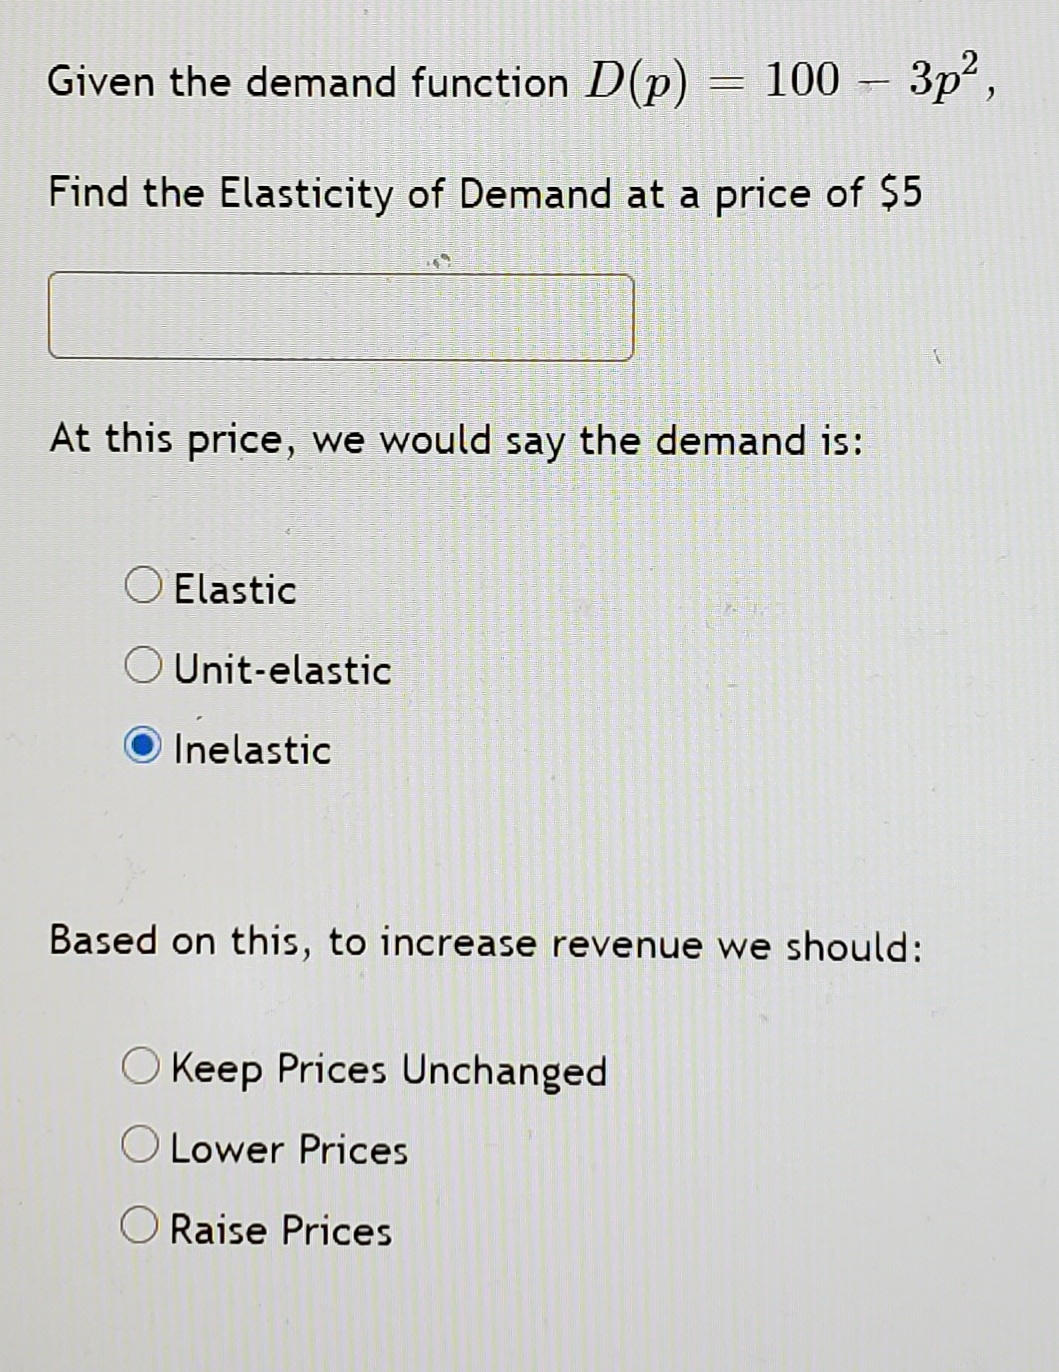 Given the demand function D(p)
100 – 3p2,
Find the Elasticity of Demand at a price of $5
At this price, we would say the demand is:
O Elastic
Unit-elastic
Inelastic
Based on this, to increase revenue we should:
O Keep Prices Unchanged
Lower Prices
O Raise Prices
